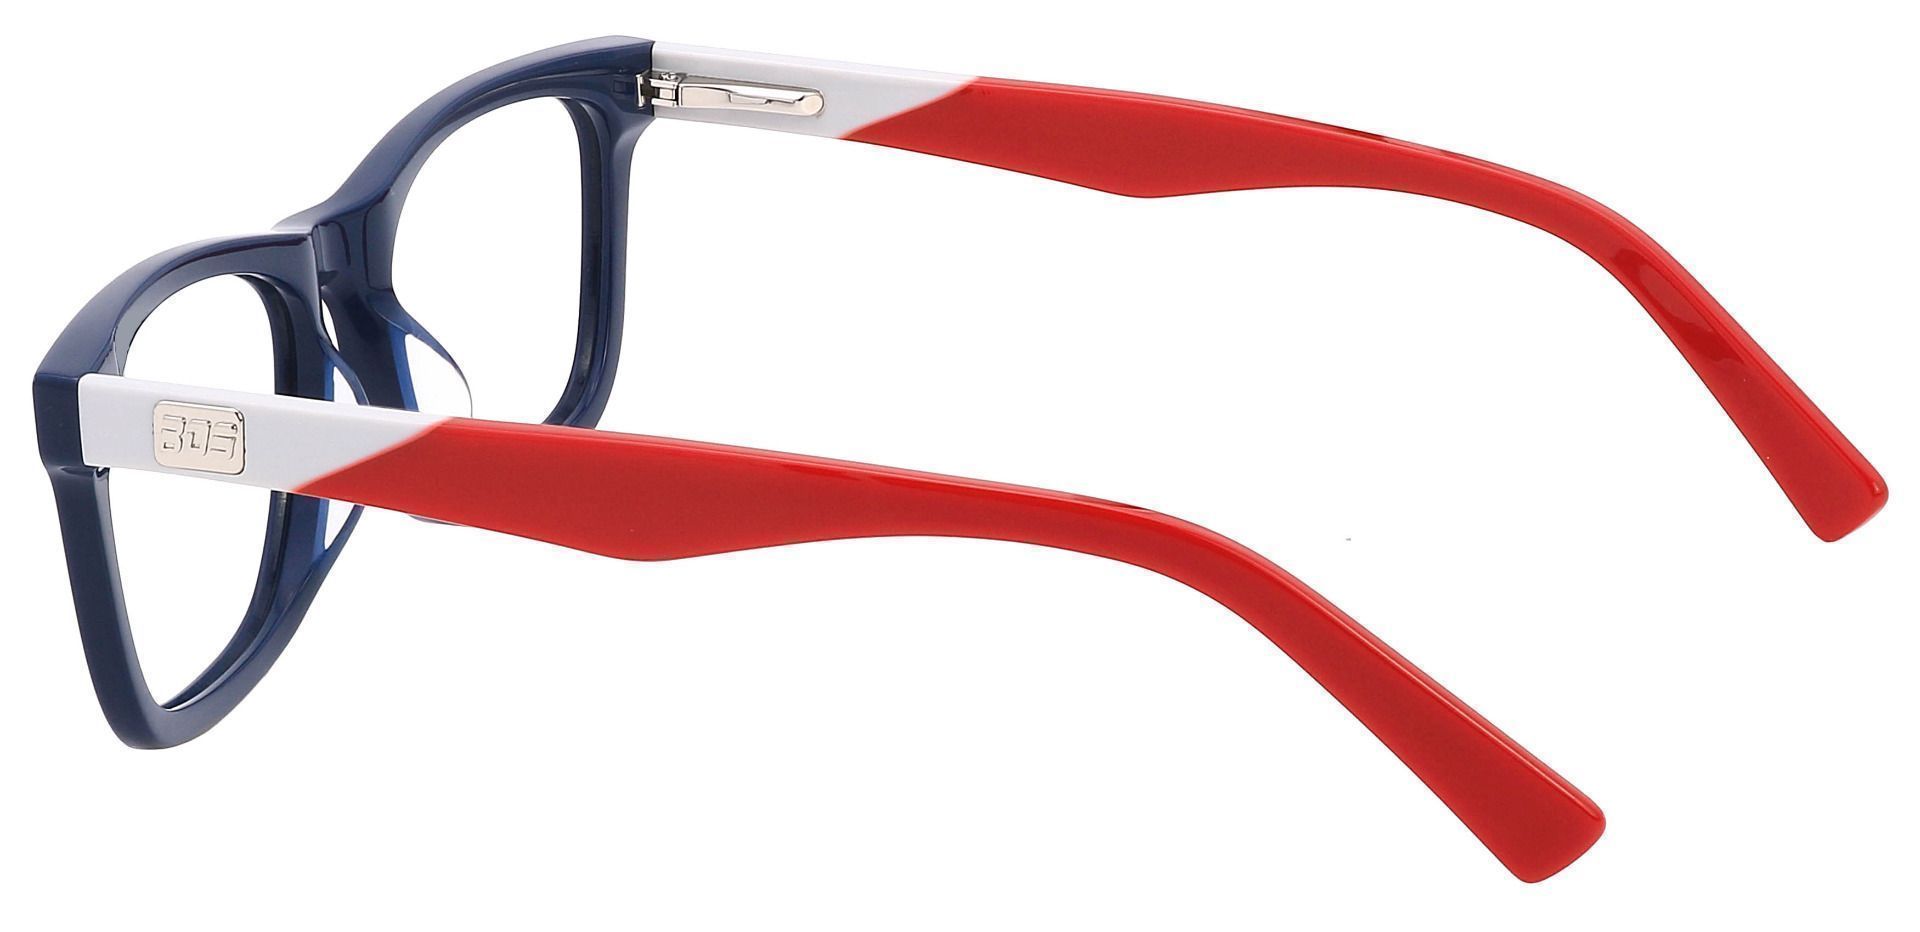 Newbury Rectangle Lined Bifocal Glasses - The Frame Is Blue And Red